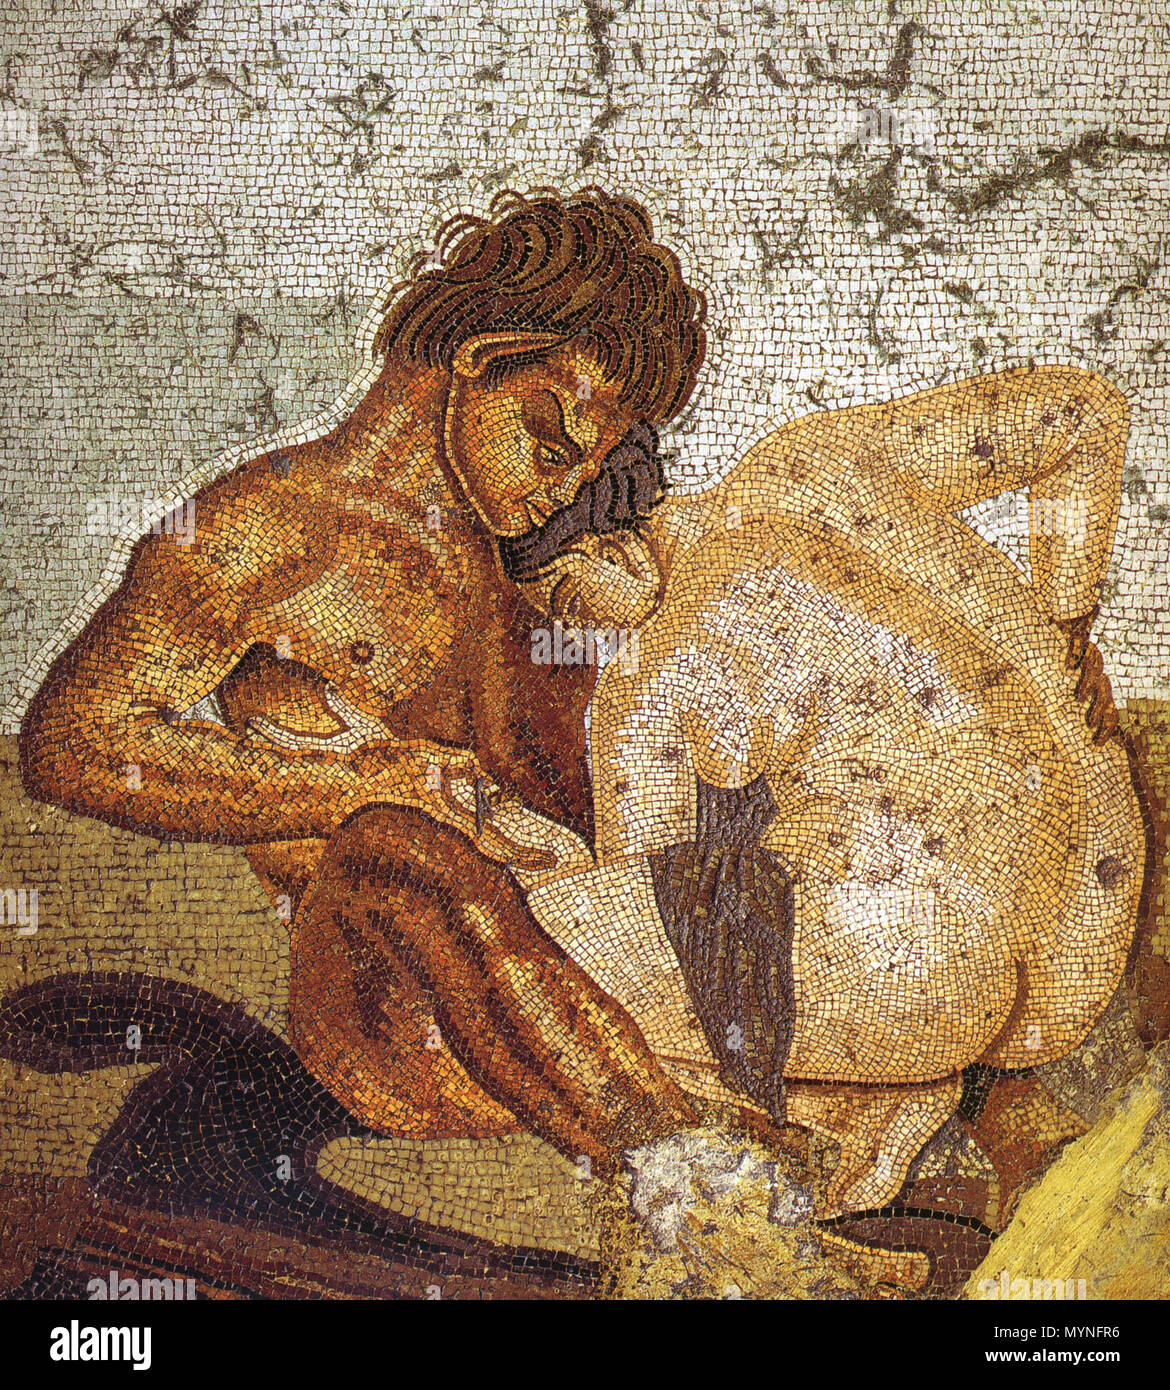 . English: Satyr and nymph. Roman mosaic from the cubiculum in the Casa del Fauno (VI 12, 2-5) in Pompeii. Museo Archeologico Nazionale (Naples), inv. nr. 27707. Deutsch: Satyr und Nymphe. Römisches Mosaik aus dem Cubiculum in der Casa del Fauno (VI 12, 2-5) in Pompeji. Museo Archeologico Nazionale (Neapel), inv. nr. 27707. 13 March 2009. WolfgangRieger 429 Pompeii - Casa del Fauno - Satyr and Nymph - MAN Stock Photo